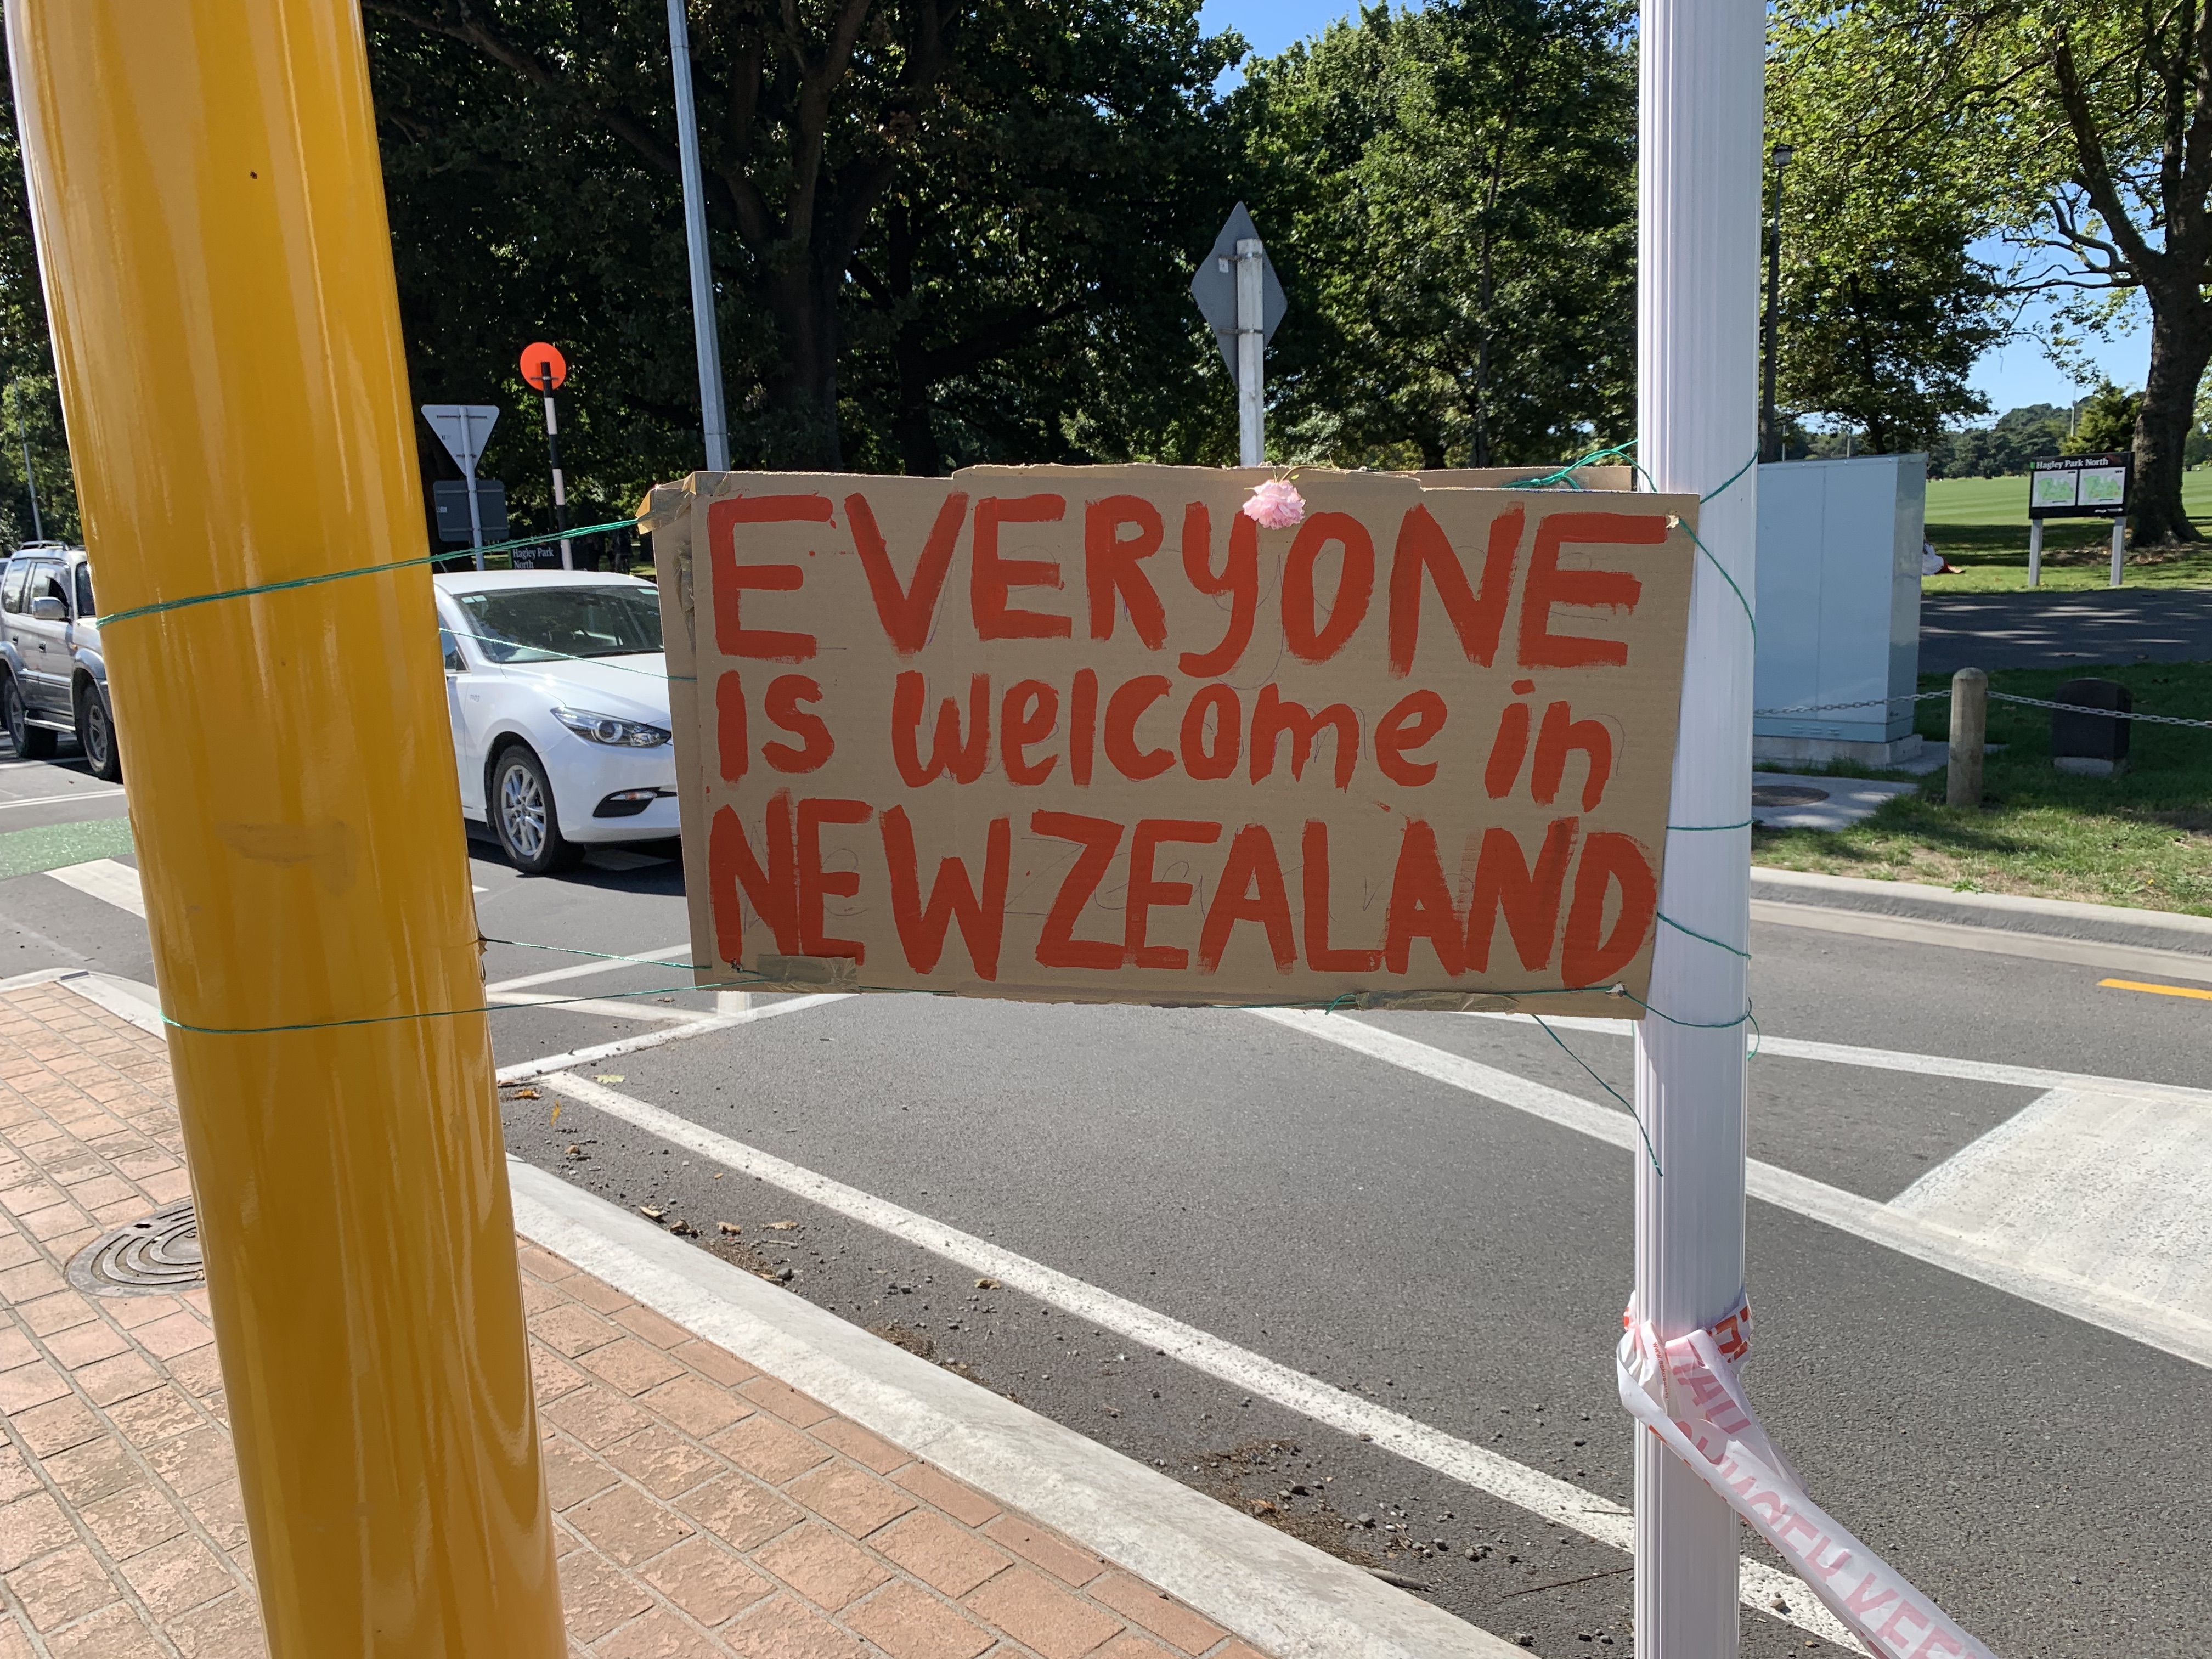 Sign in Christchurch reading 'Everyone is welcome in New Zealand' after the mosque shooting